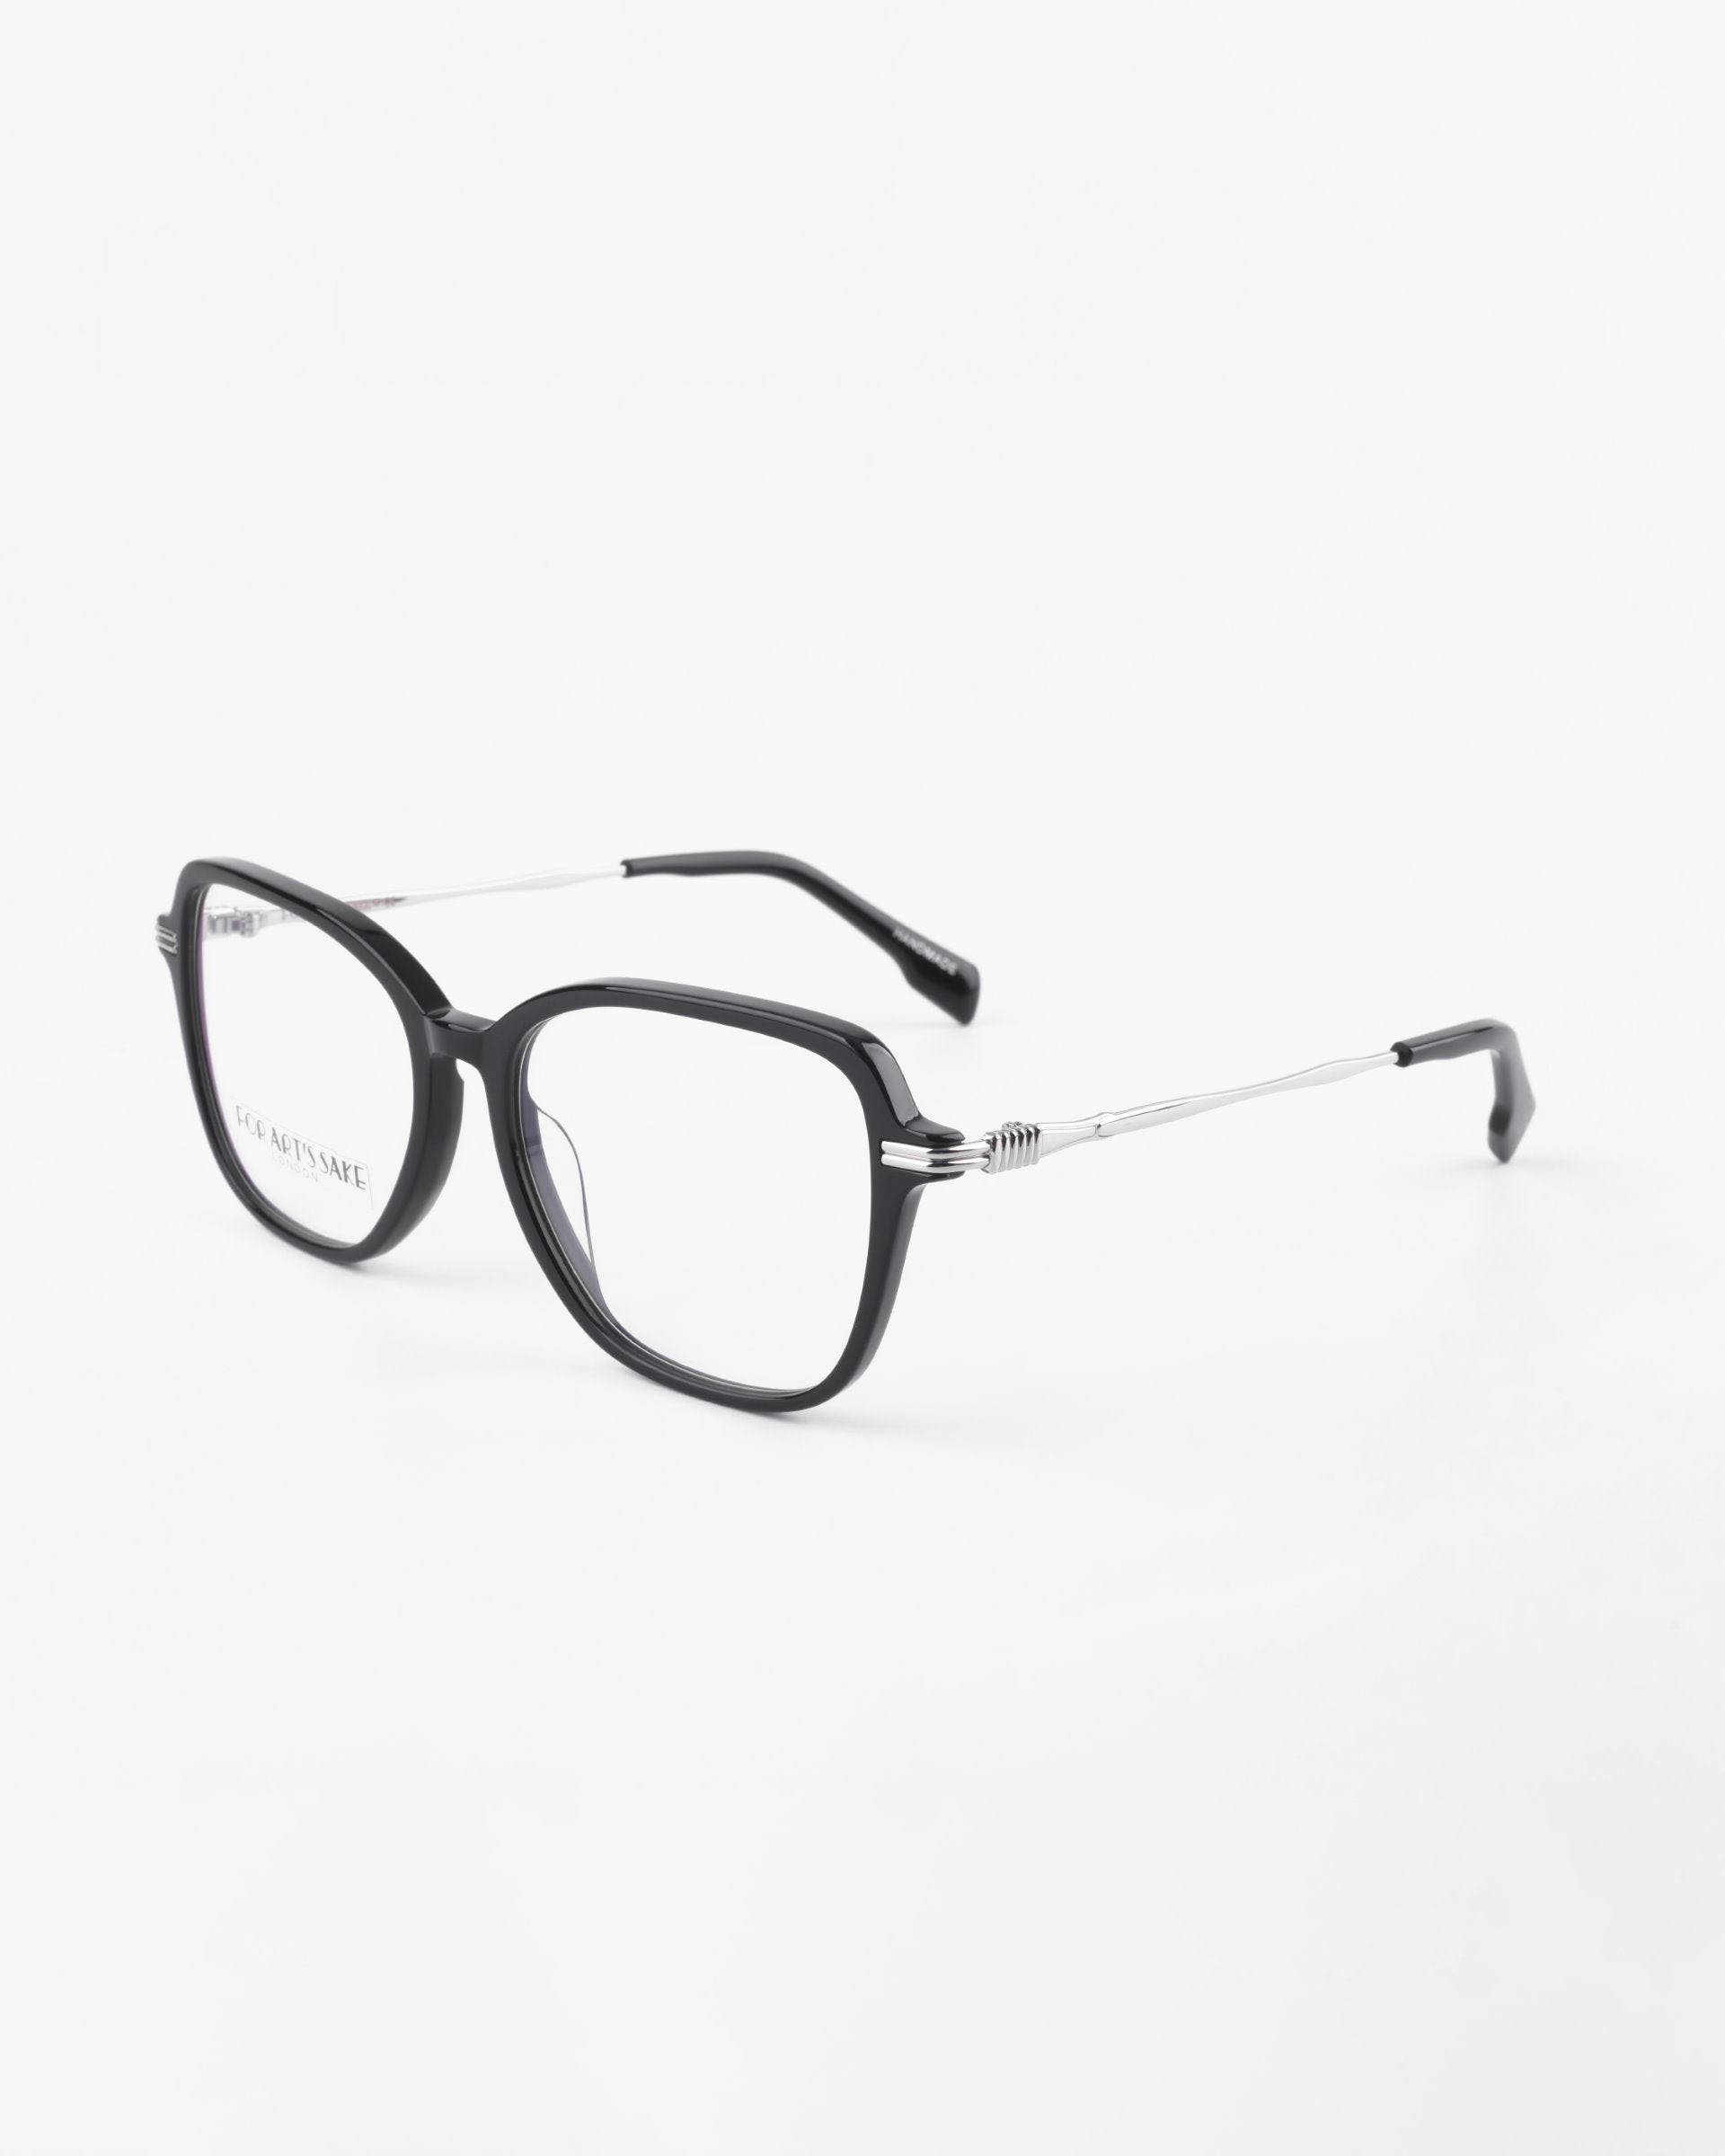 A pair of black, rectangular Sonnet eyeglasses from For Art&#39;s Sake® with a thin silver frame around the lenses. The arms are black at the tips with a spring hinge detail near the frame. Featuring blue light filter for added eye protection, the glasses are positioned on a white surface.